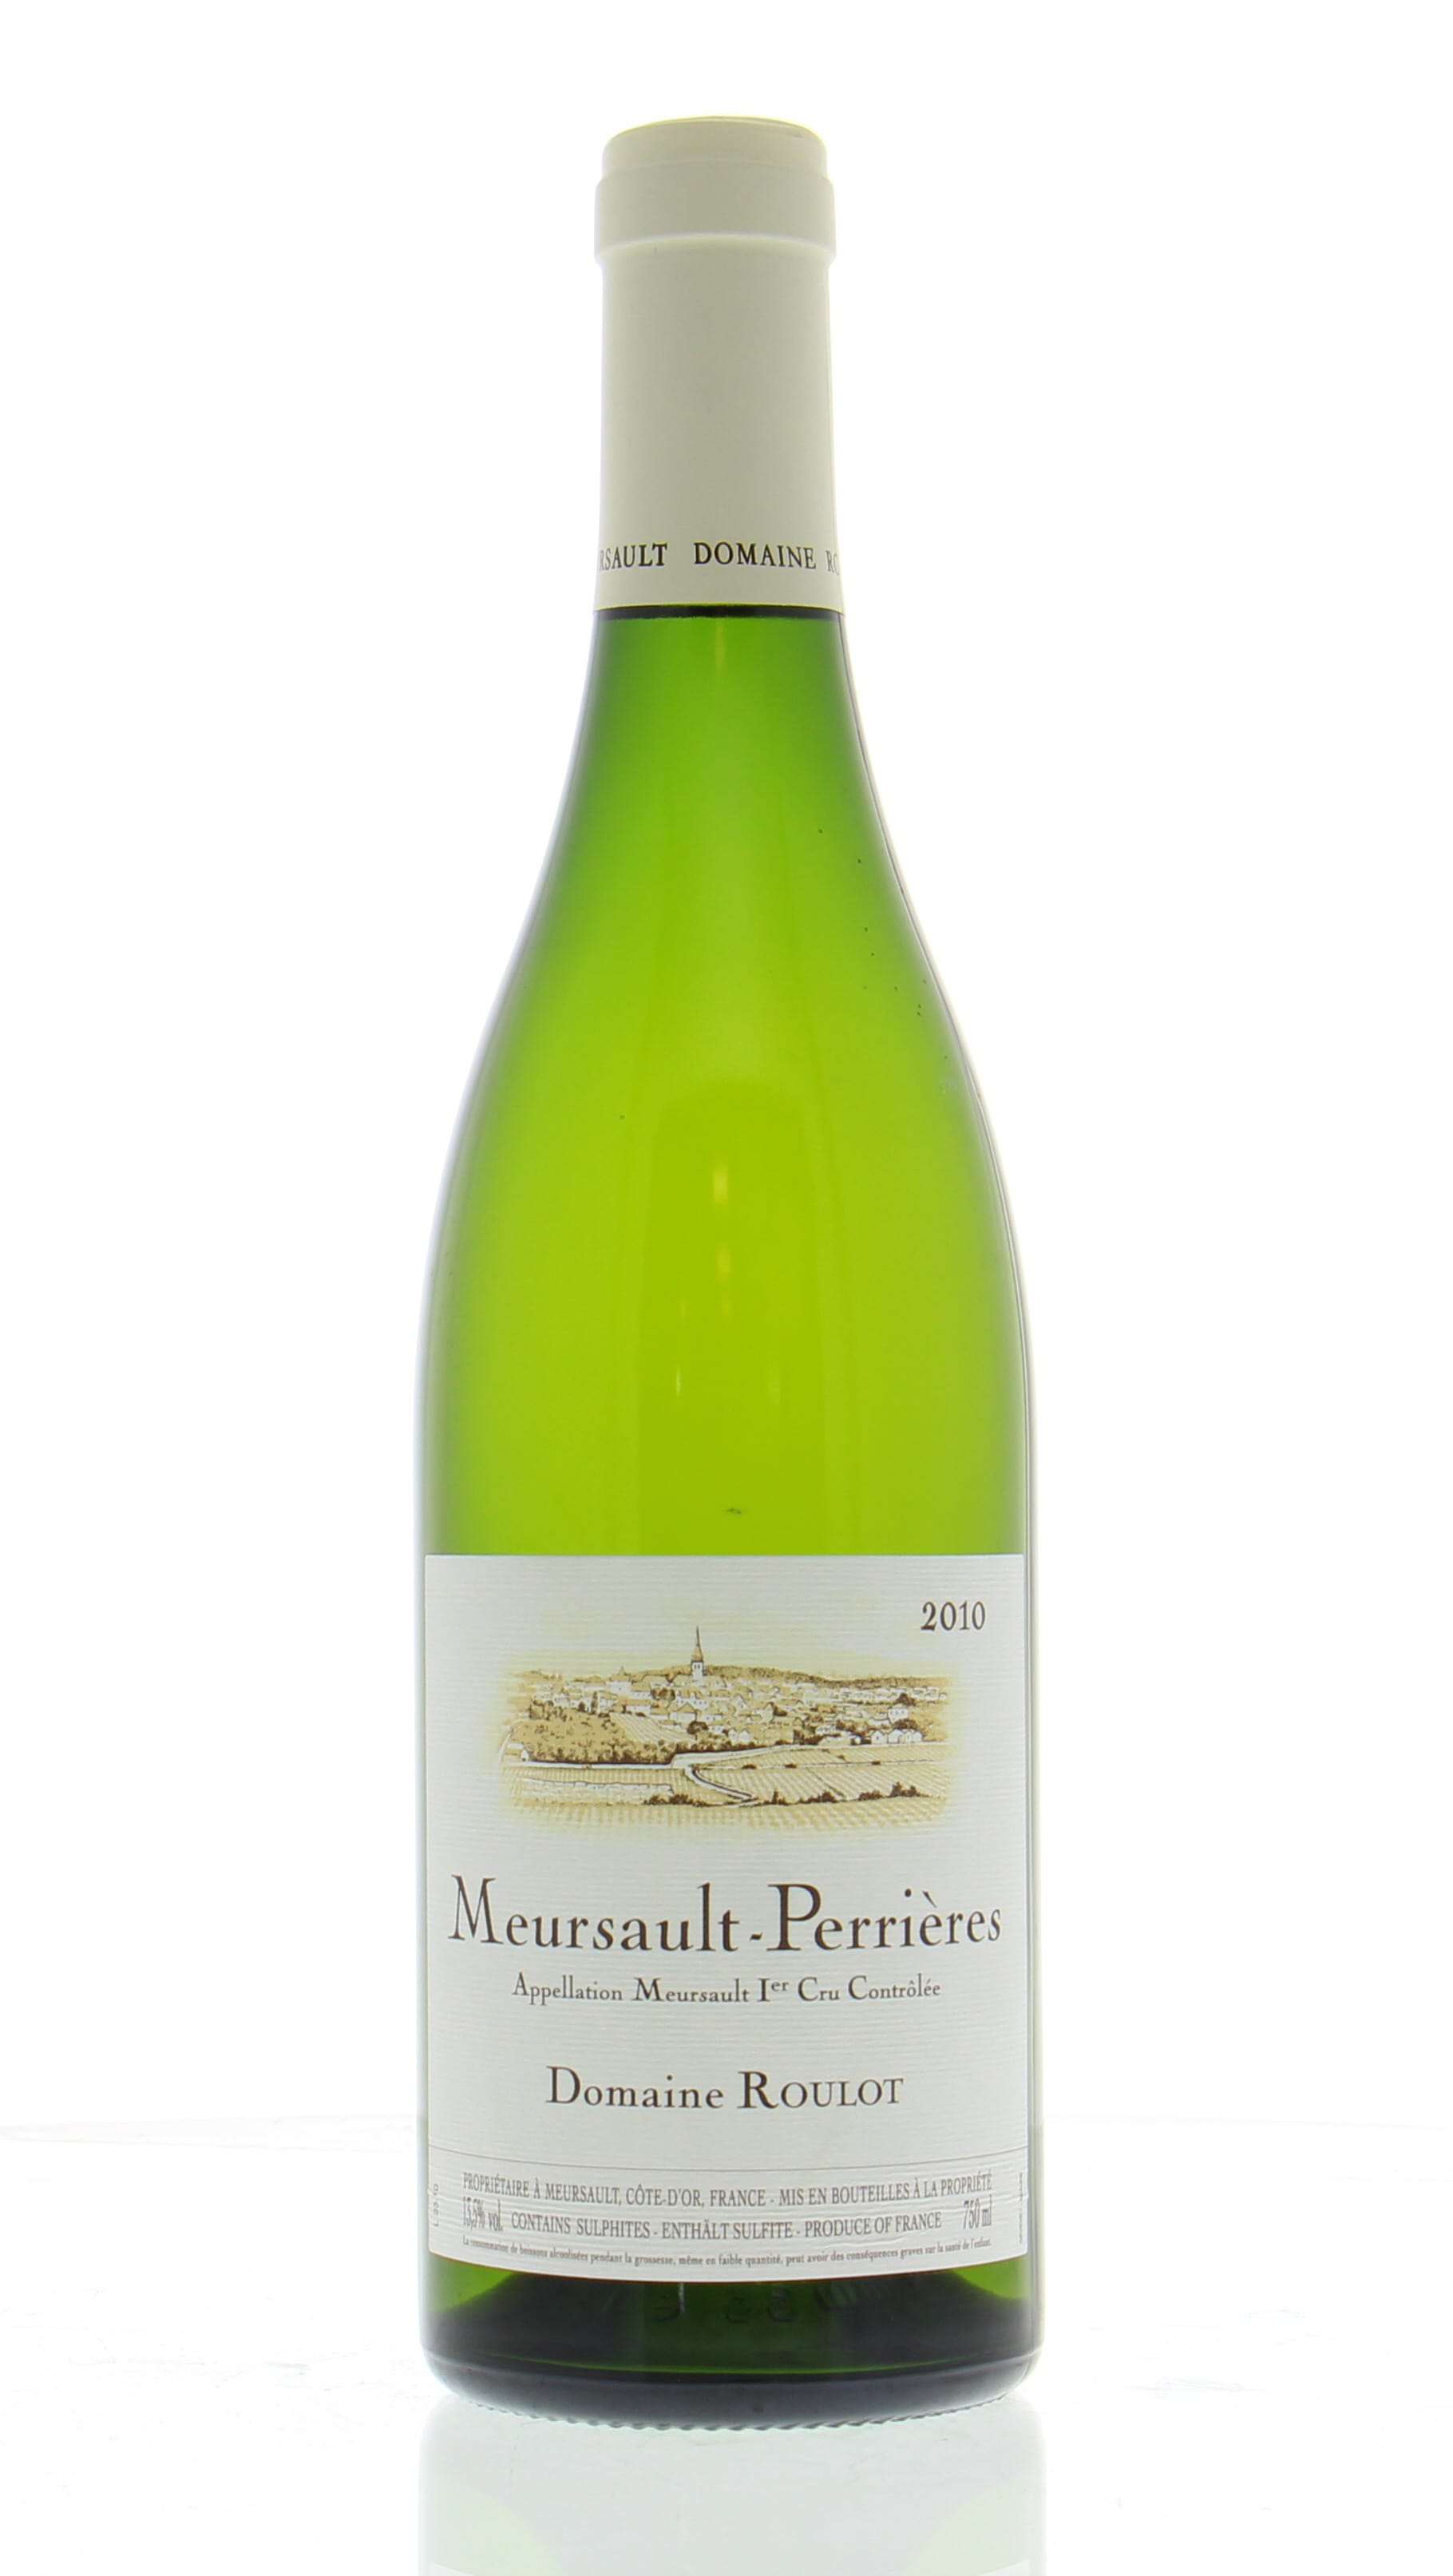 Guy Roulot - Meursault Les Perrieres 2010 Perfect